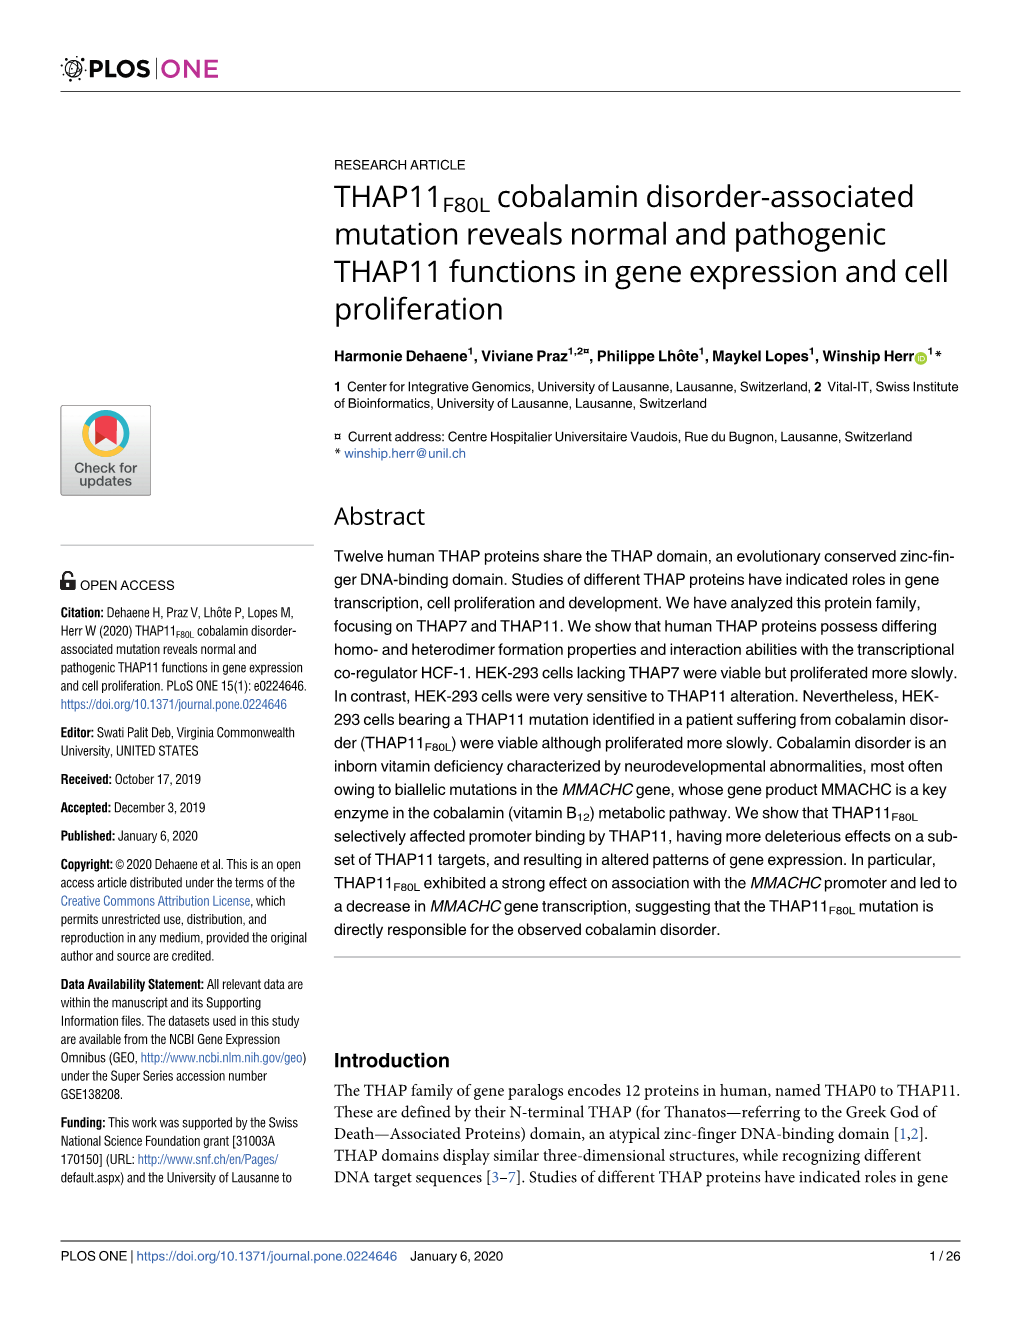 THAP11F80L Cobalamin Disorder-Associated Mutation Reveals Normal and Pathogenic THAP11 Functions in Gene Expression and Cell Proliferation